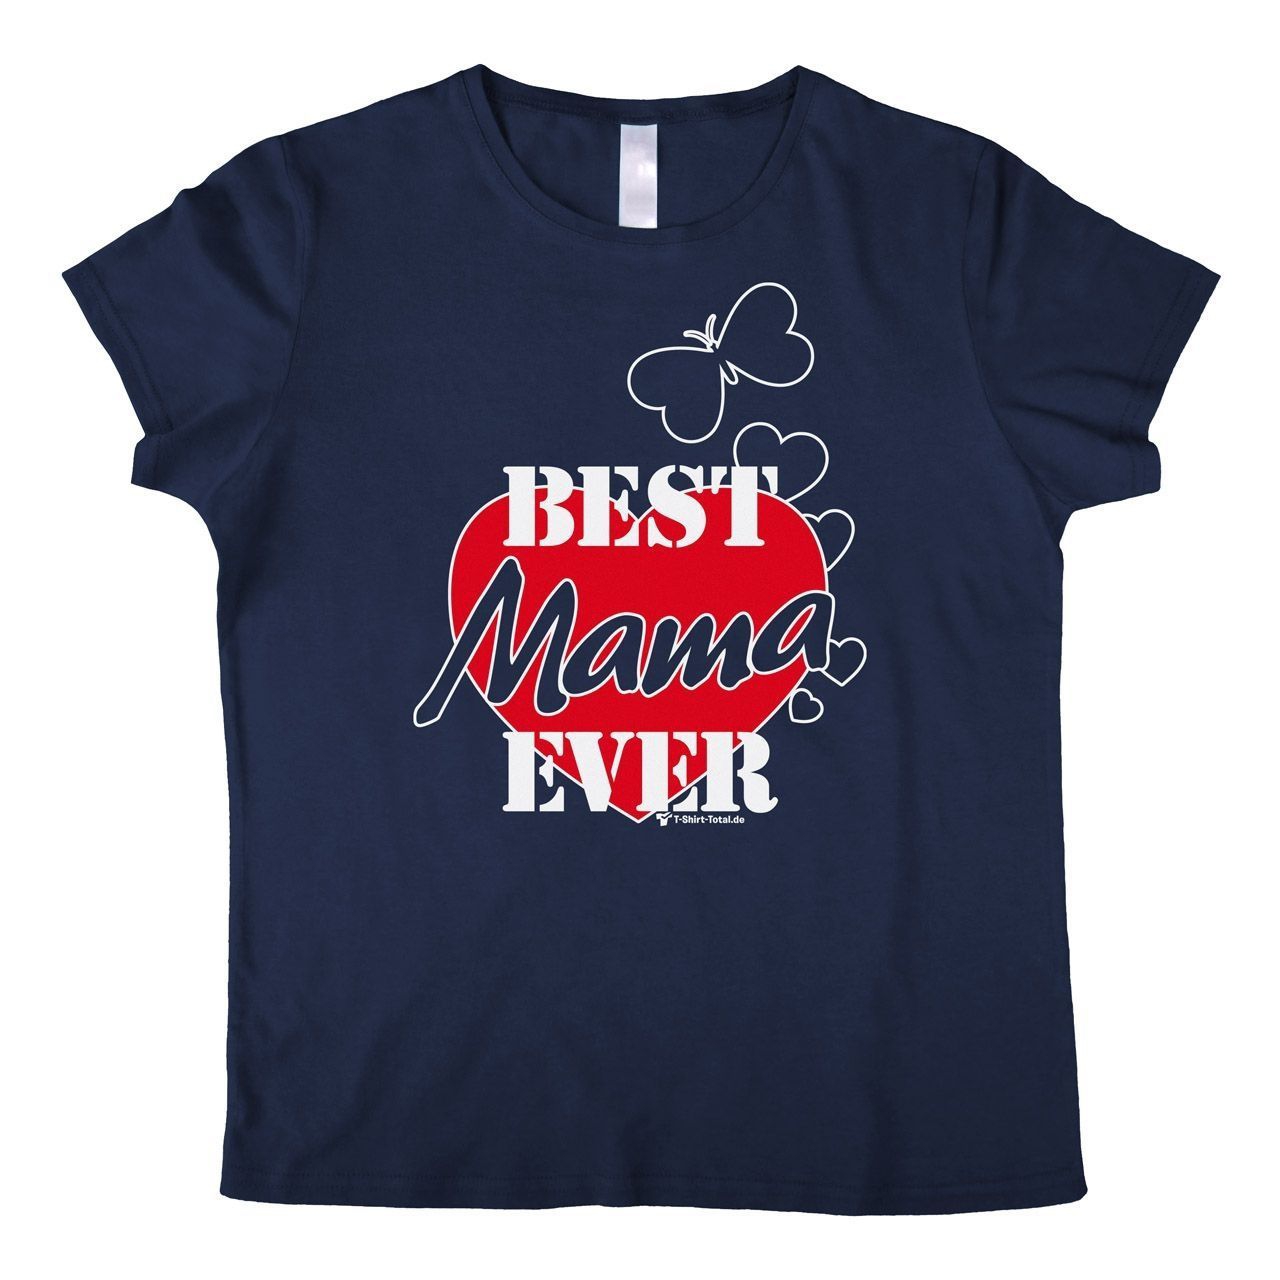 Best Mama ever Woman T-Shirt navy Extra Large